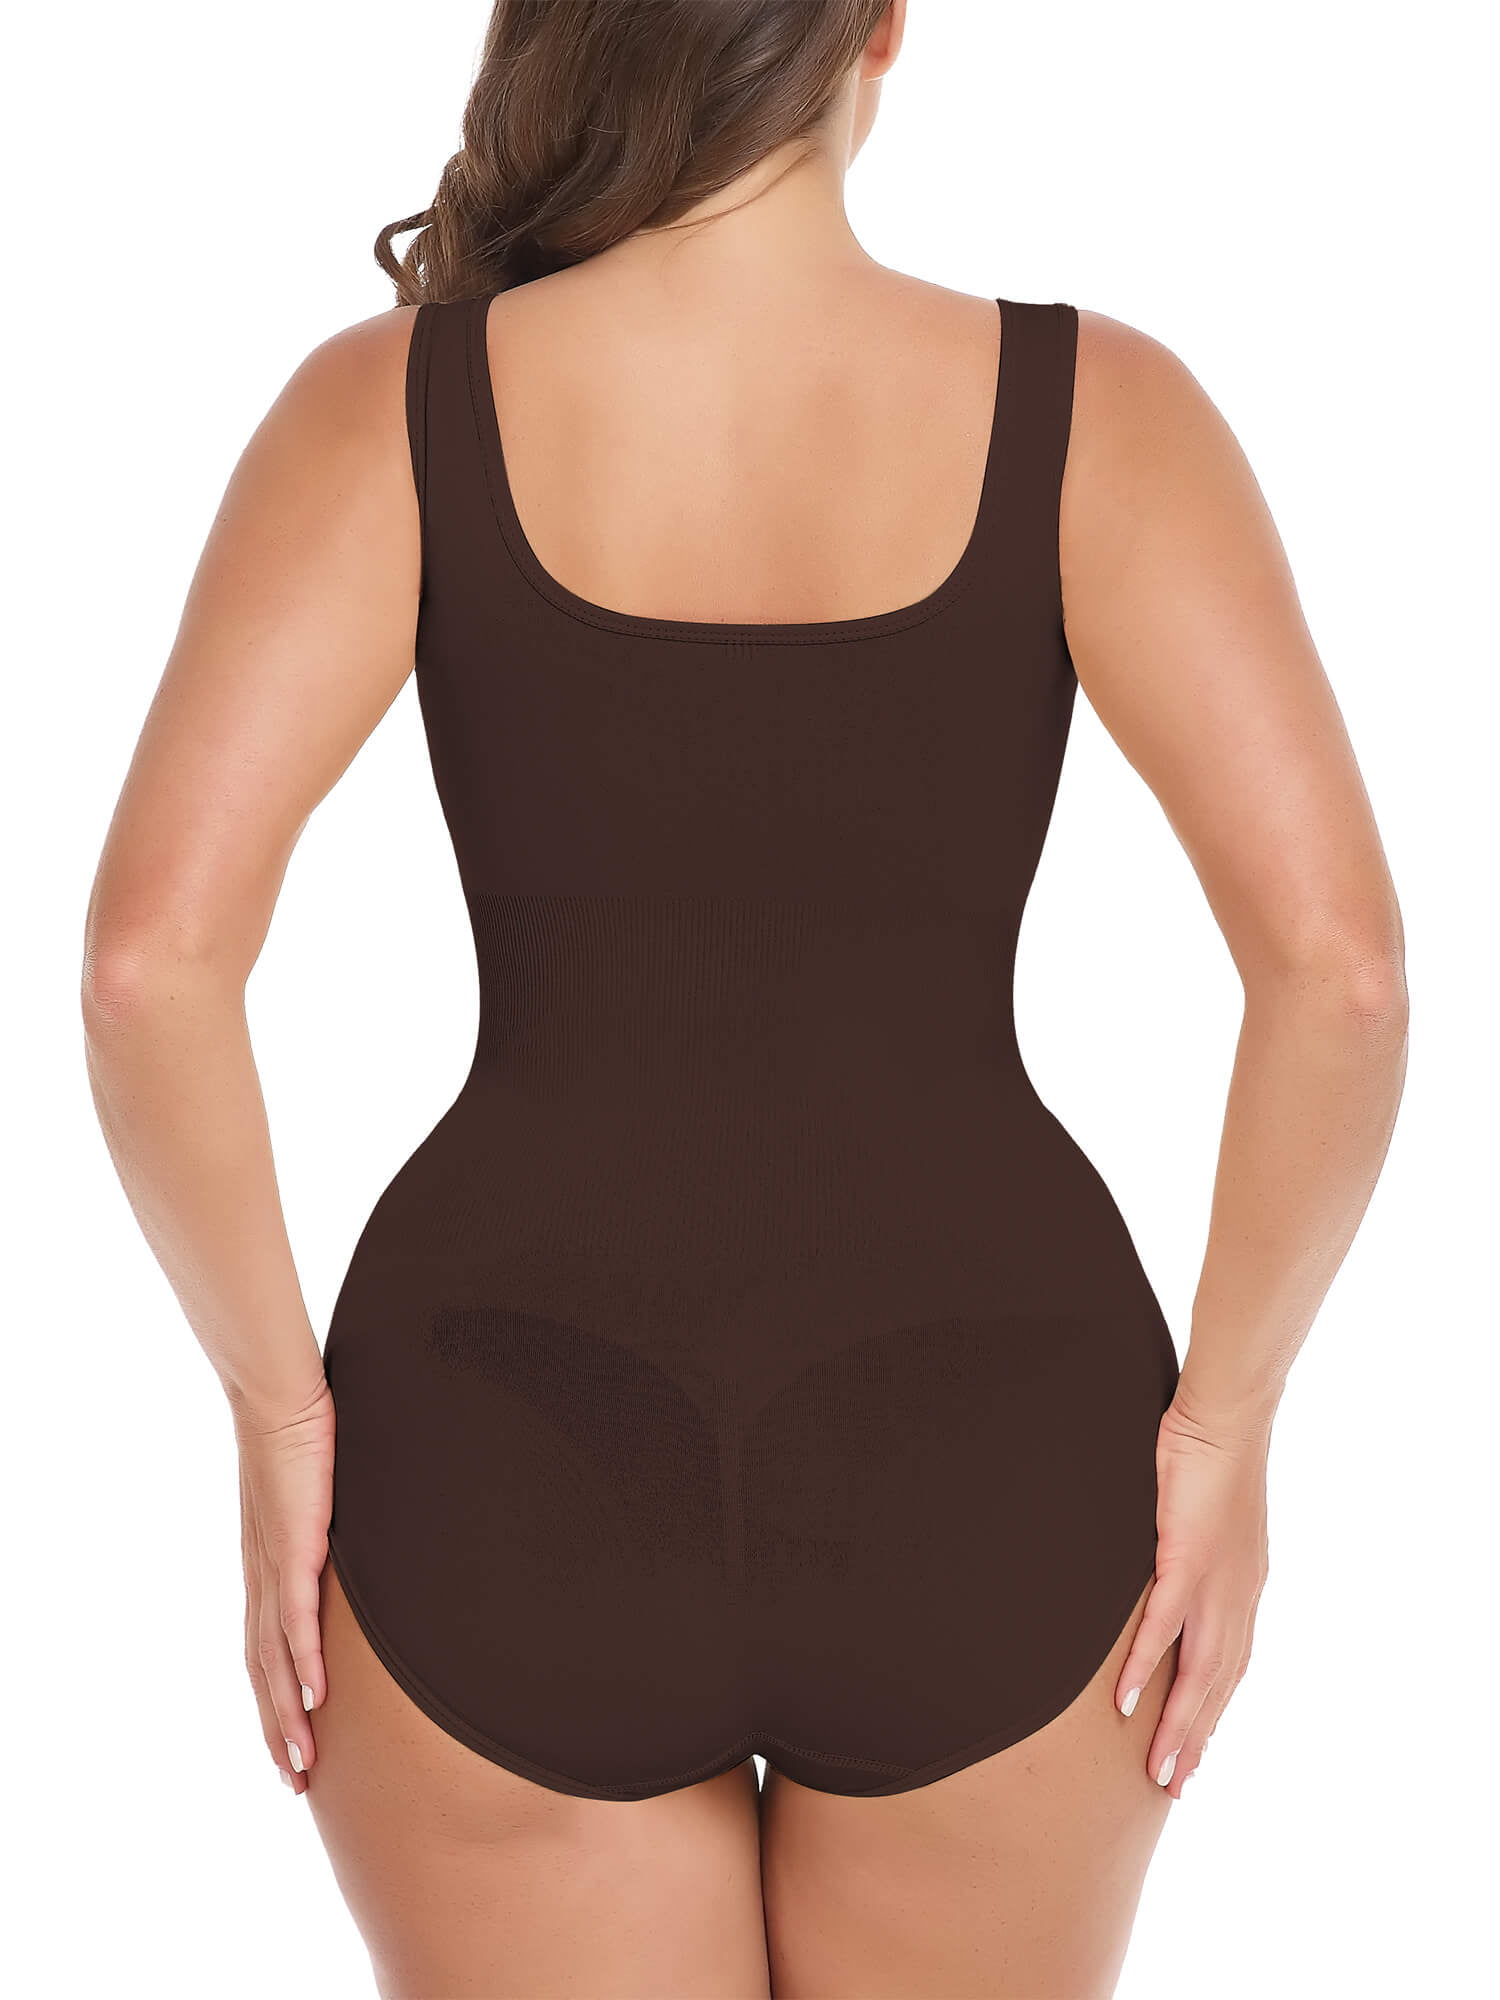 CHARMMA Low Back Bodysuit for Women - 3 Pack Tummy Control Shapewear  Sculpting Thong Body Shaper under Dress Black Coffee Beige Large at   Women's Clothing store